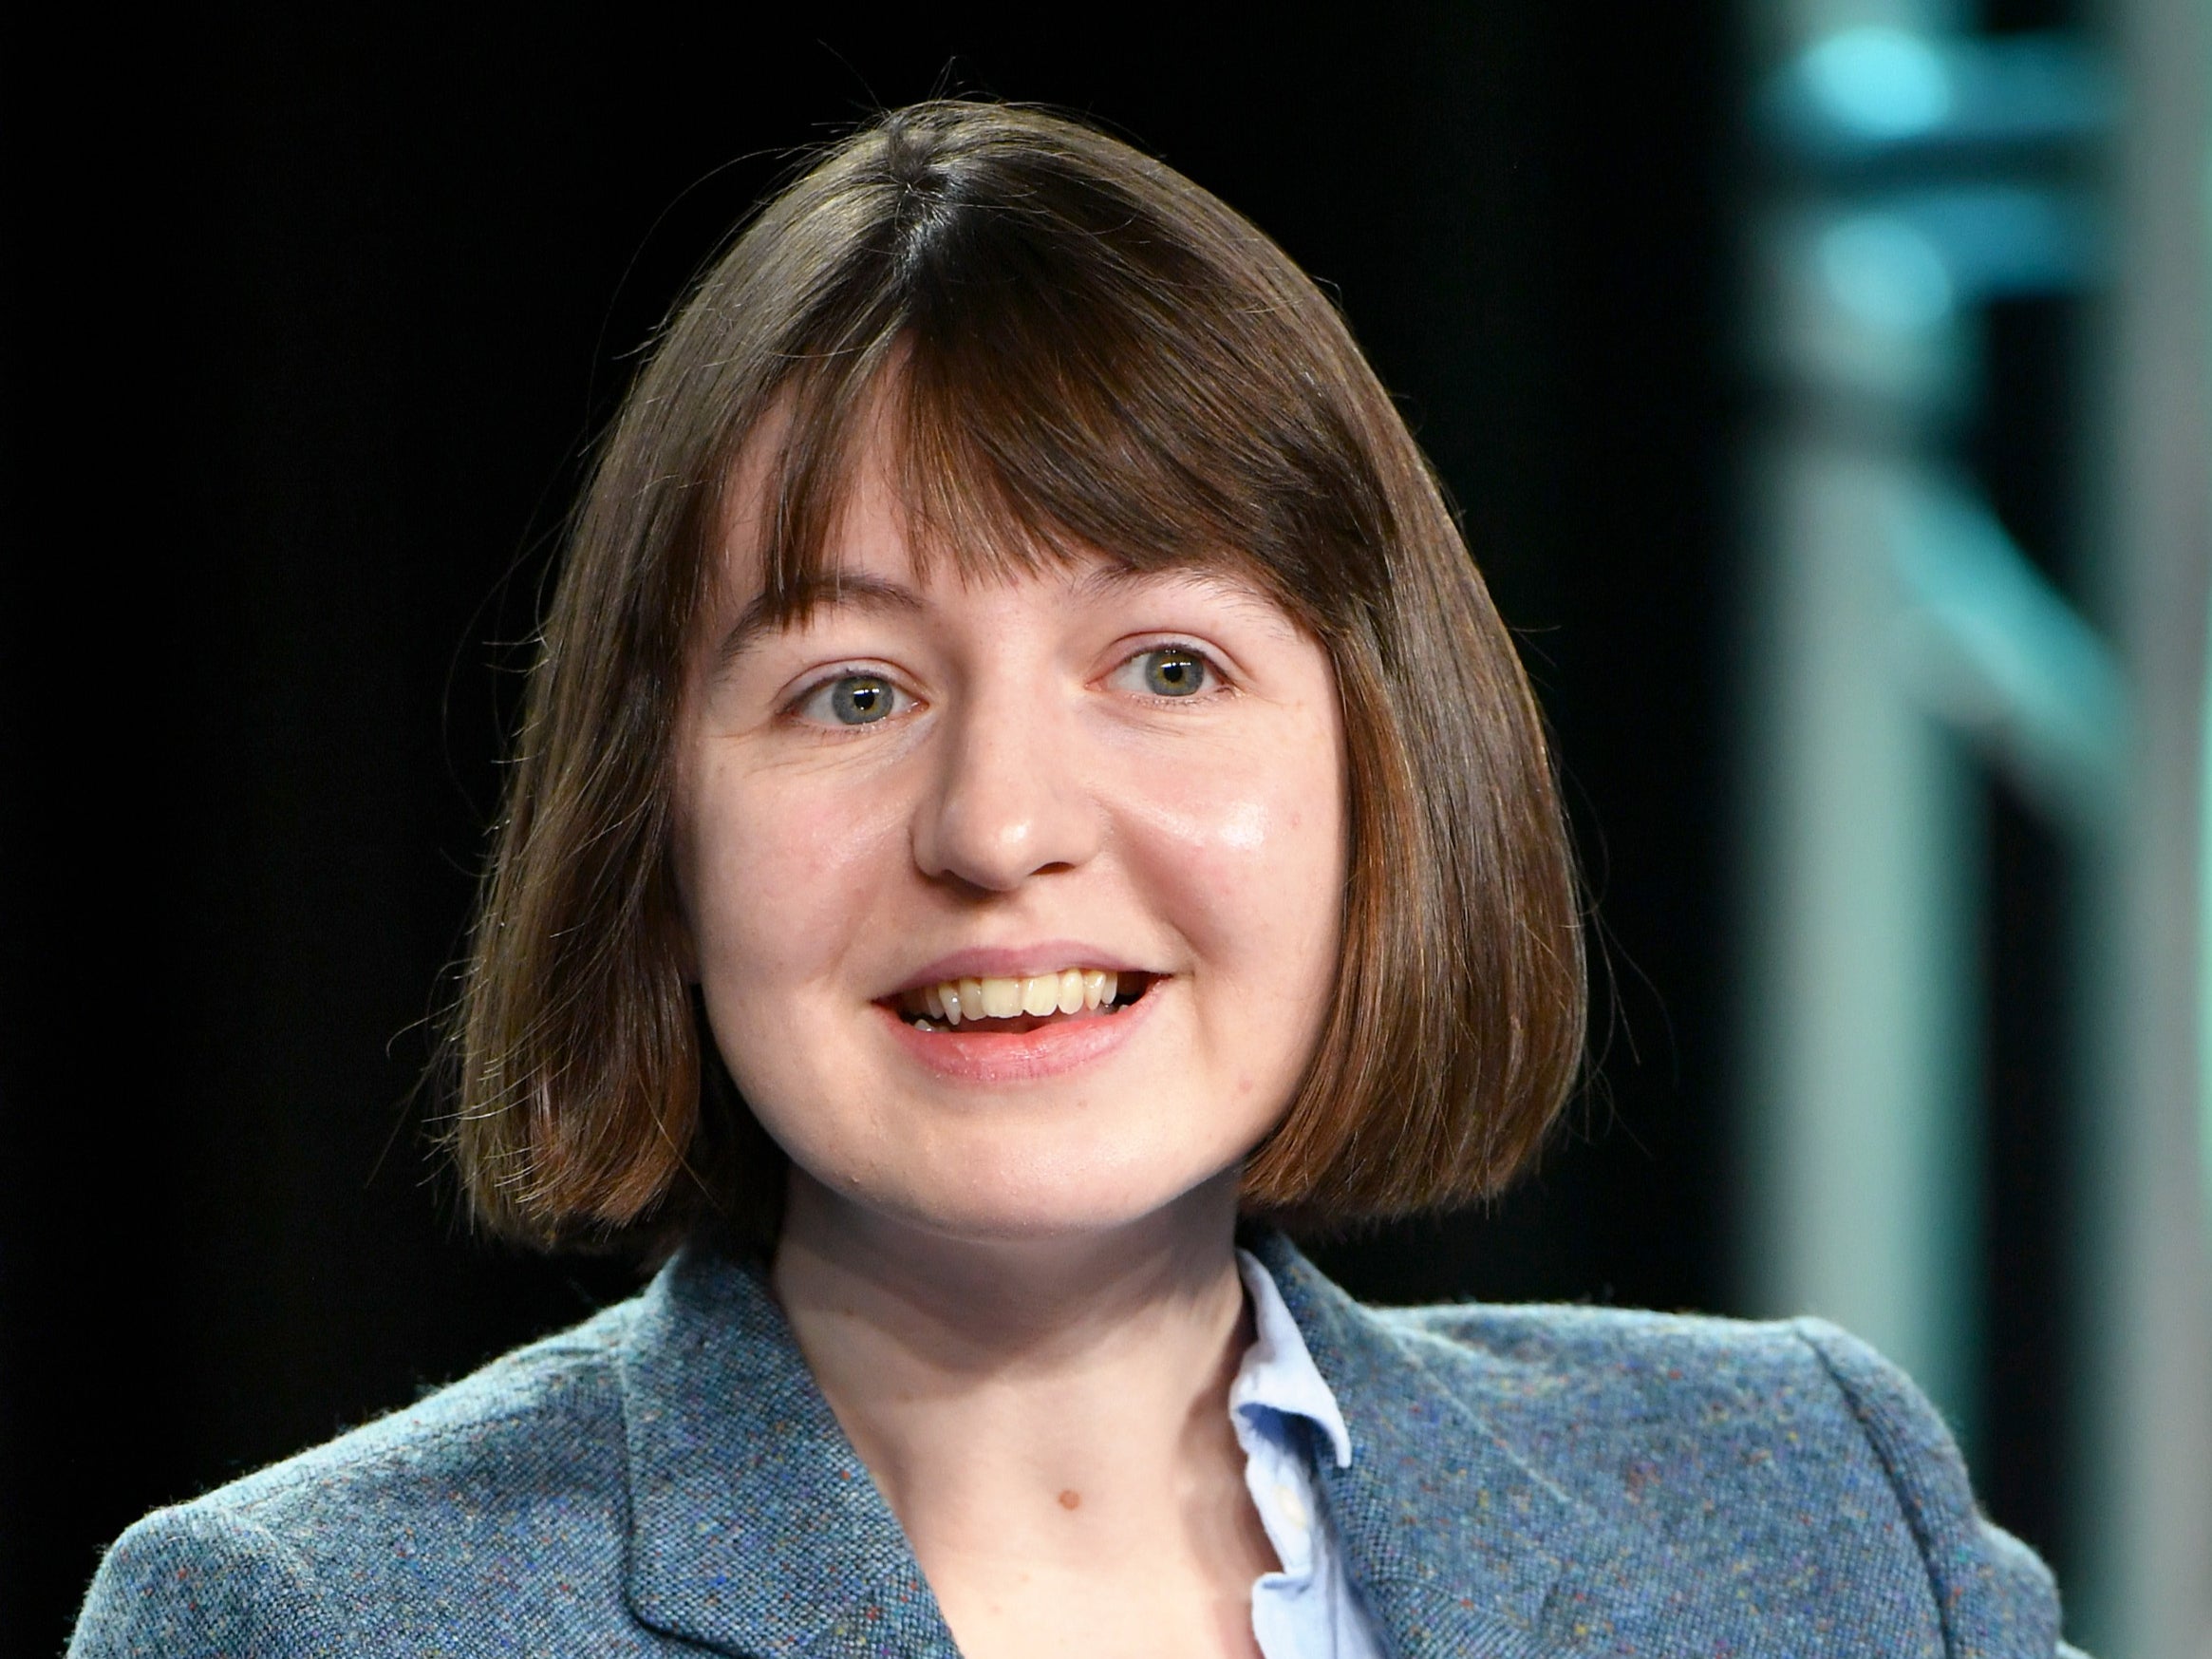 Sally Rooney, author of ‘Normal People’, pictured in January 2020